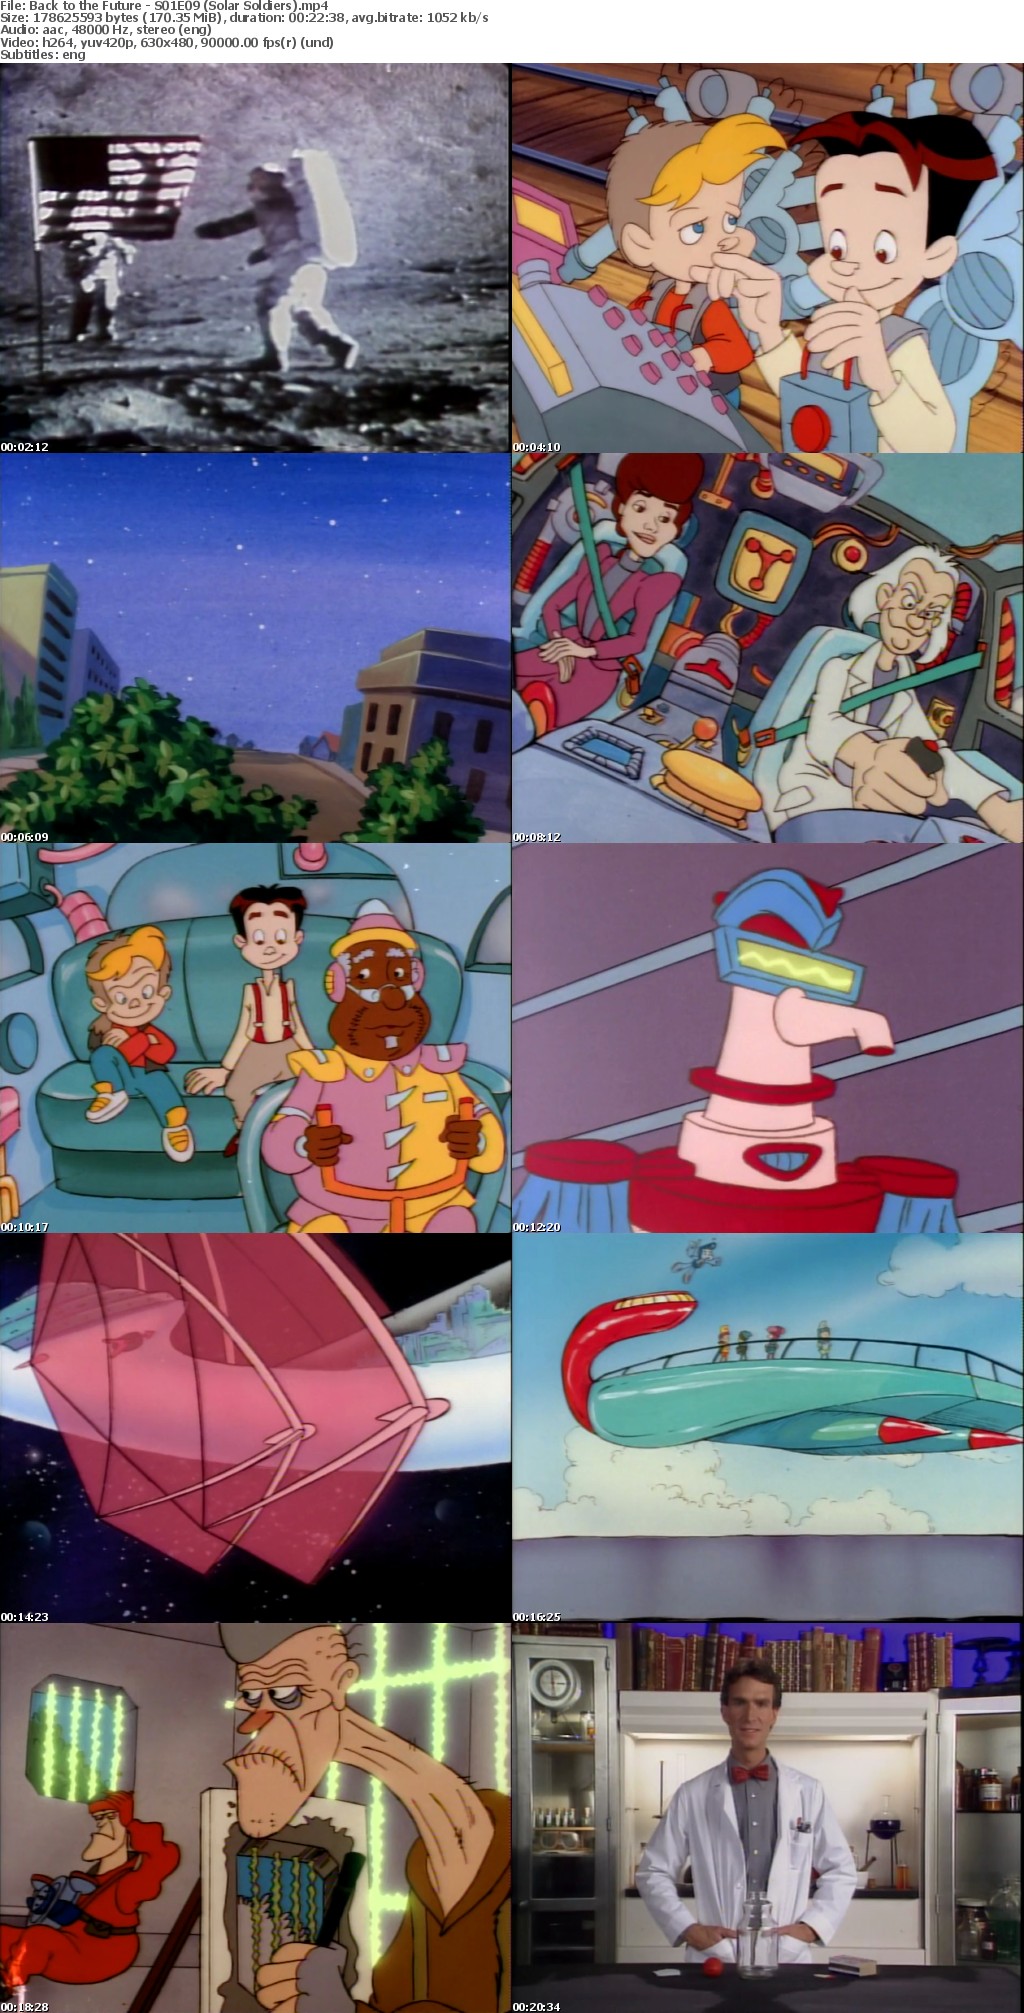 Back to the Future - (Complete Animated Series)